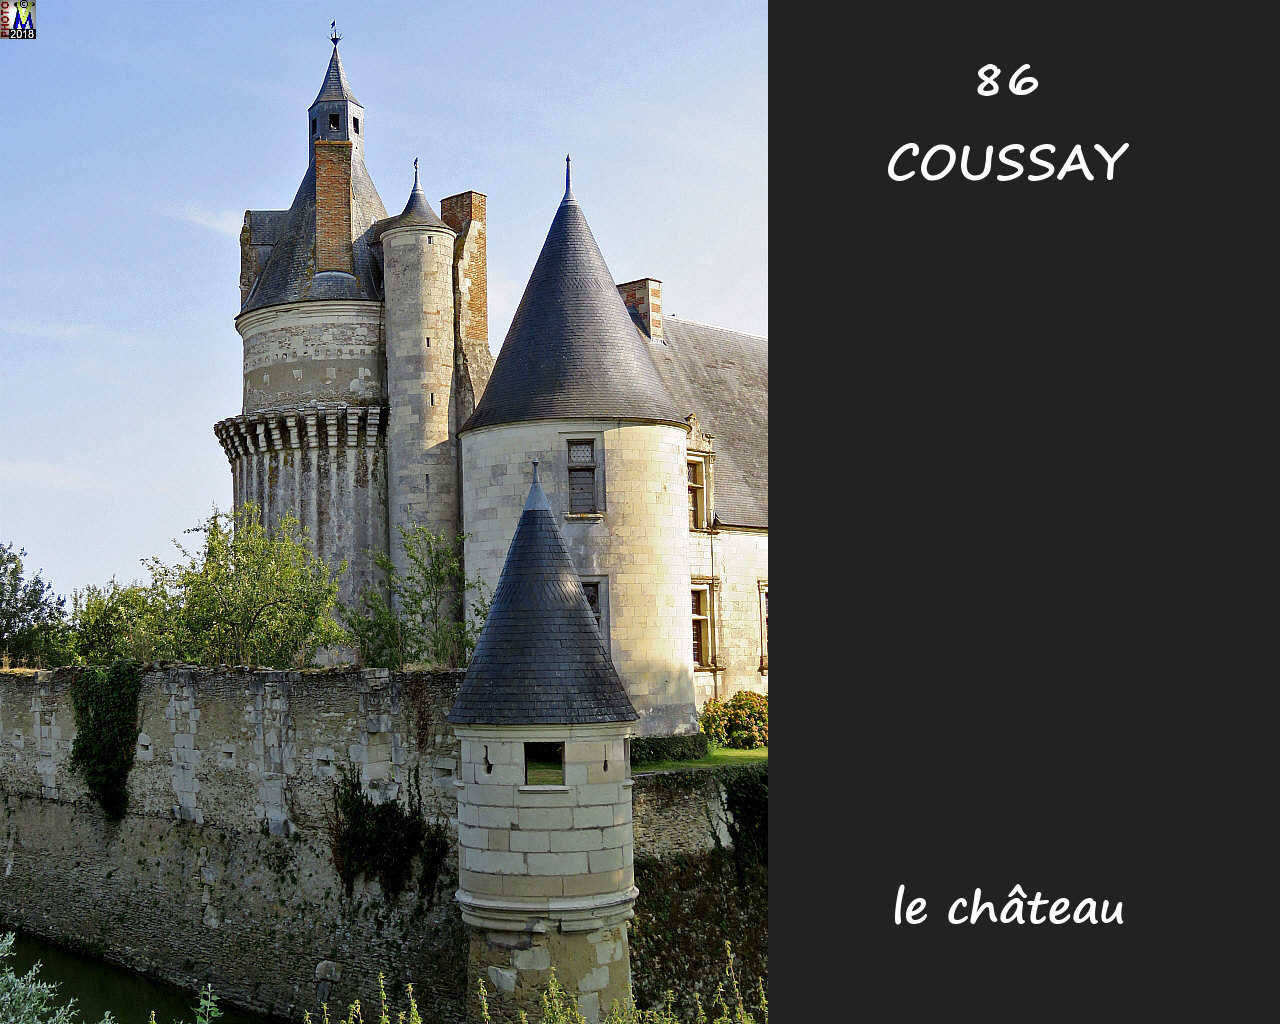 86COUSSAY_chateau_110.jpg